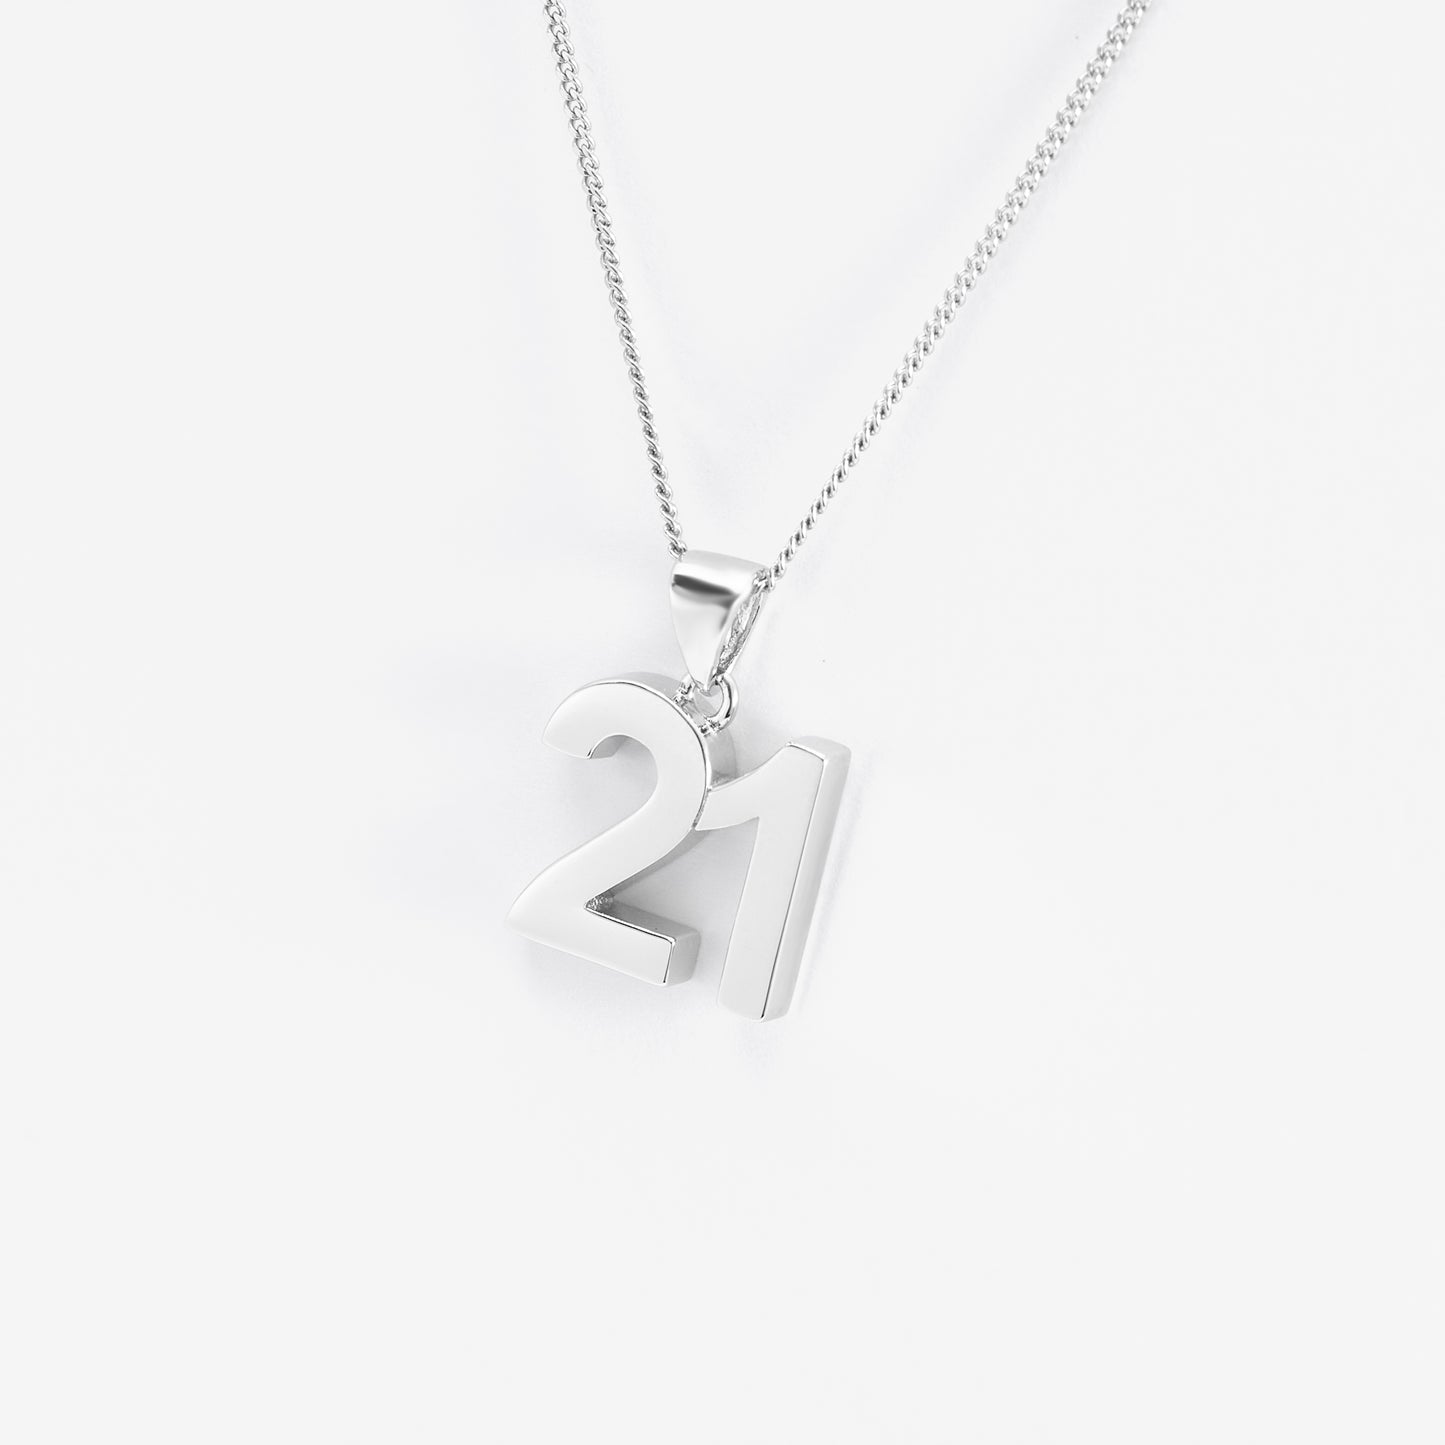 Sterling Silver Solid Number 21 Pendant